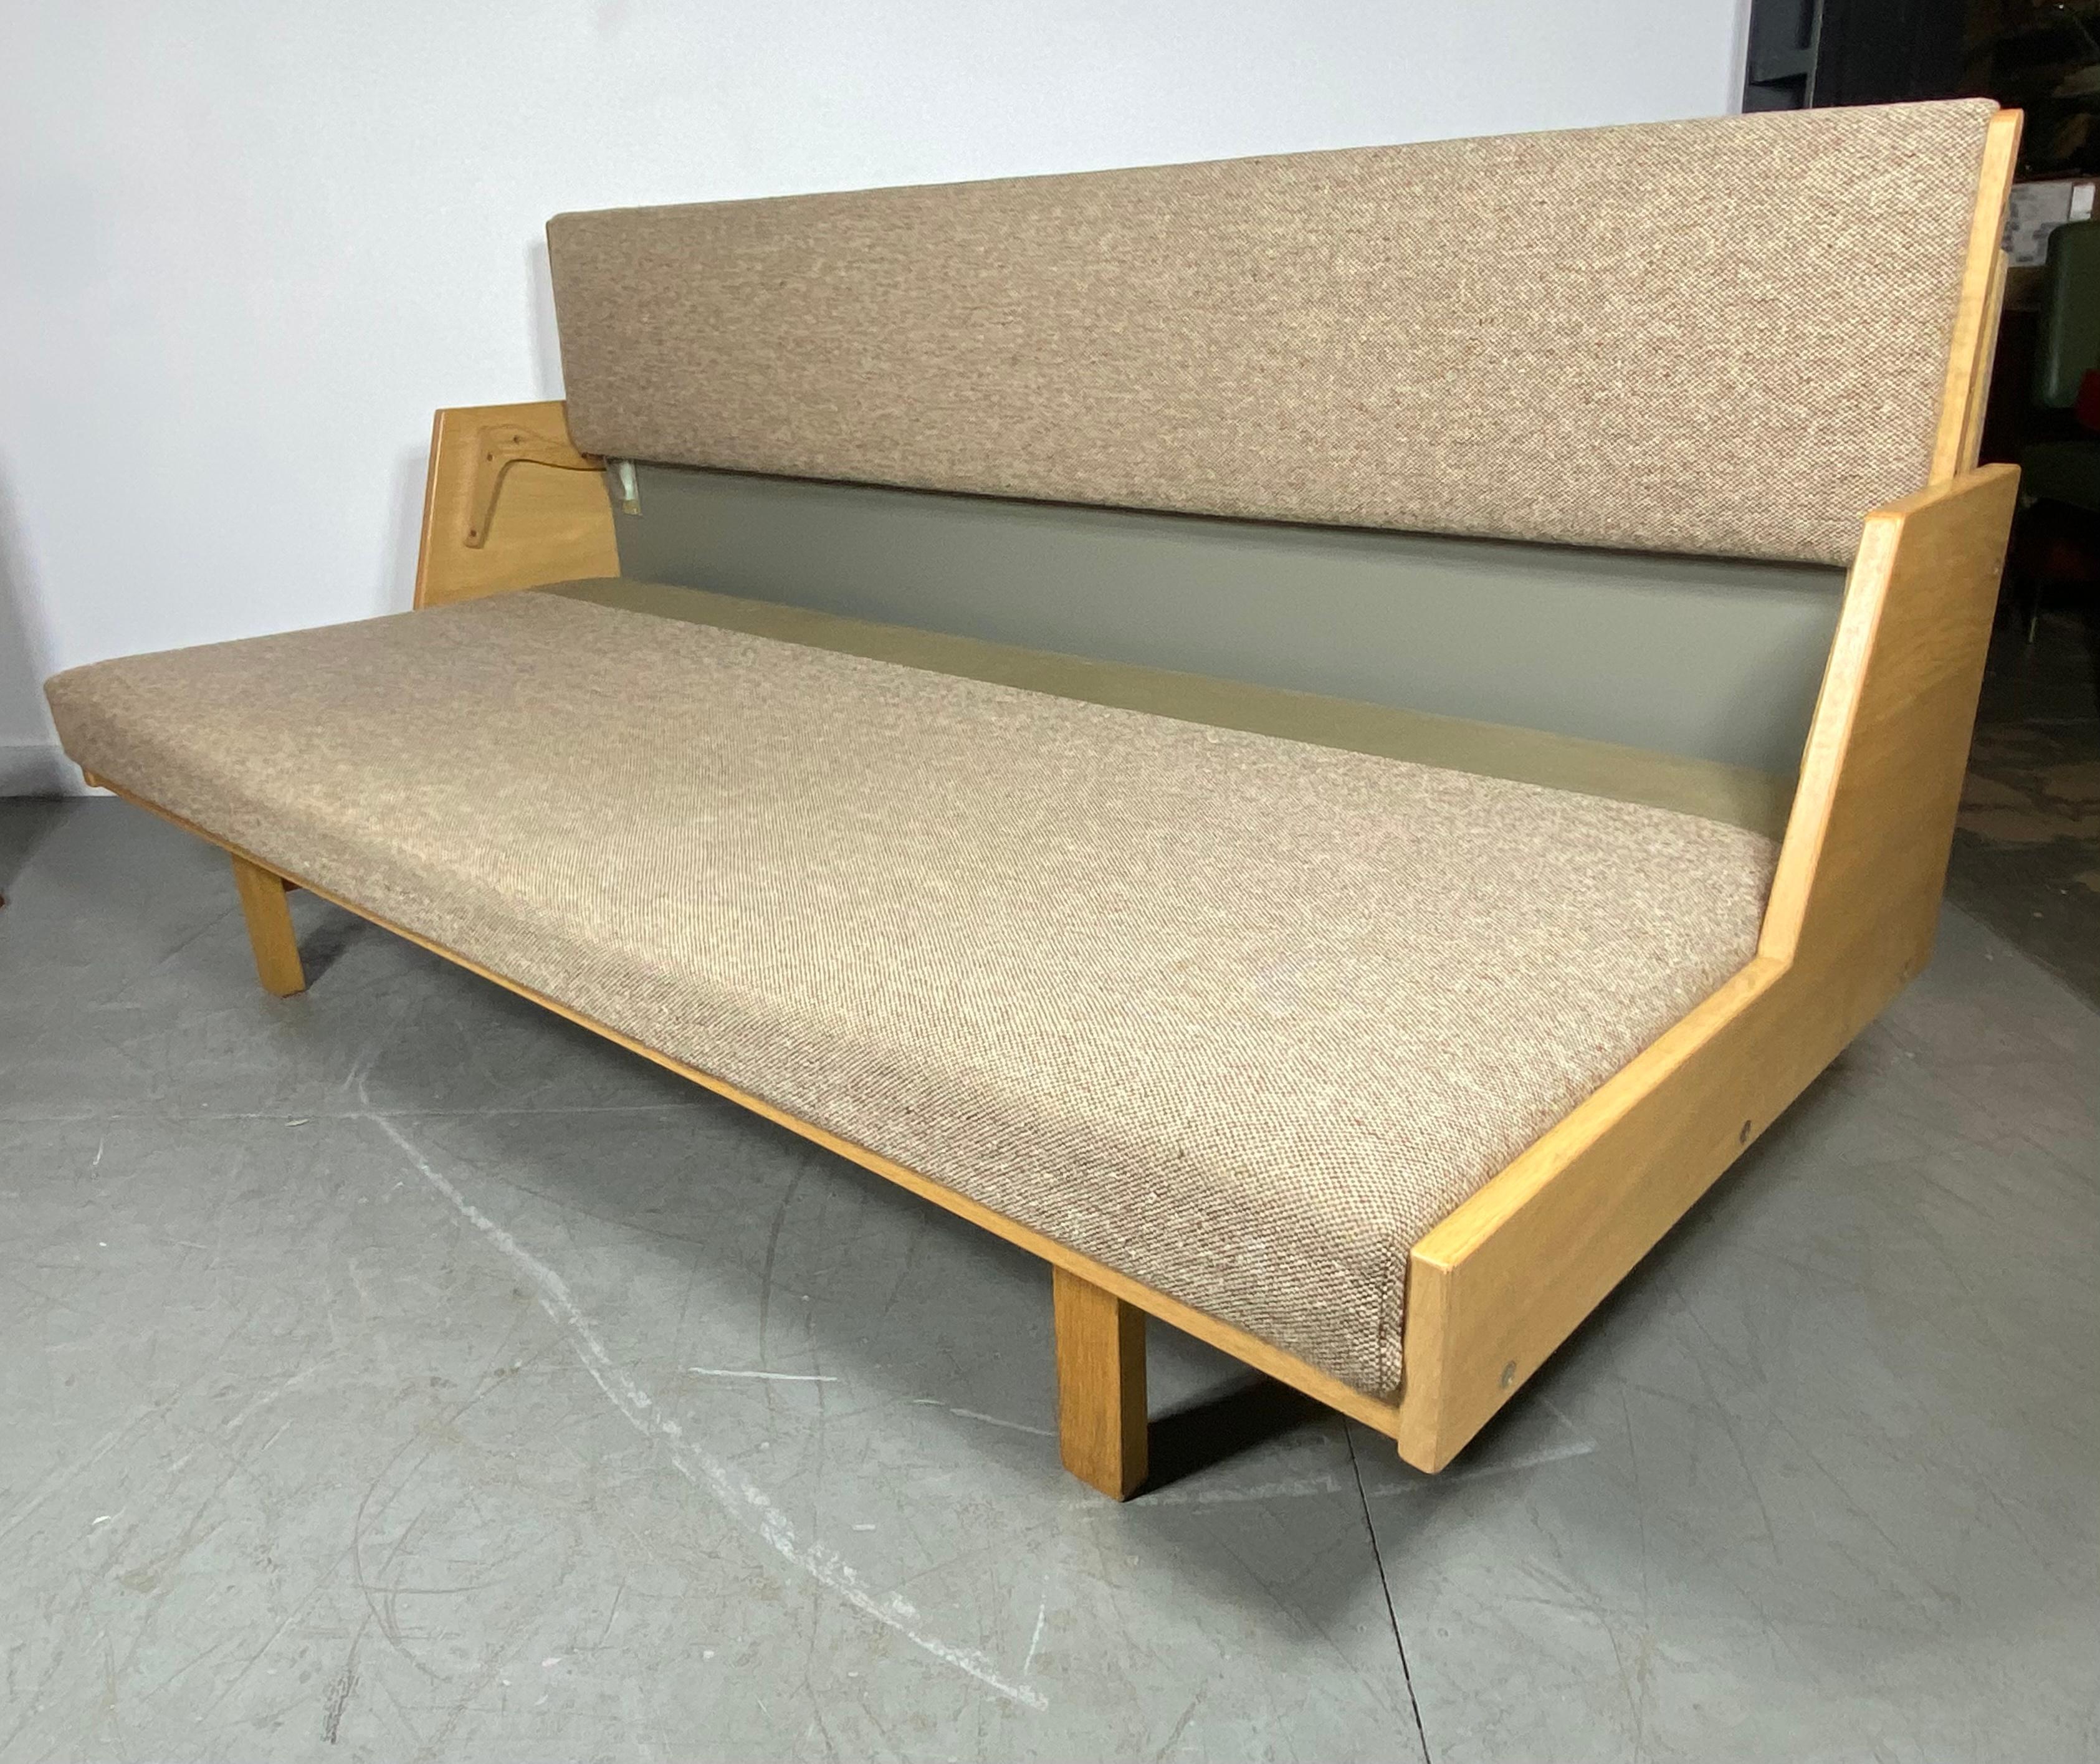 Designed by Hans Wegner in 1954, the GE 258 daybed is a versatile piece of furniture. The upholstered backrest lifts to provide a roomy bed. Crafted in solid wood, this bench is hand built at GETAMA’s factory in Gedsted, Denmark by skilled